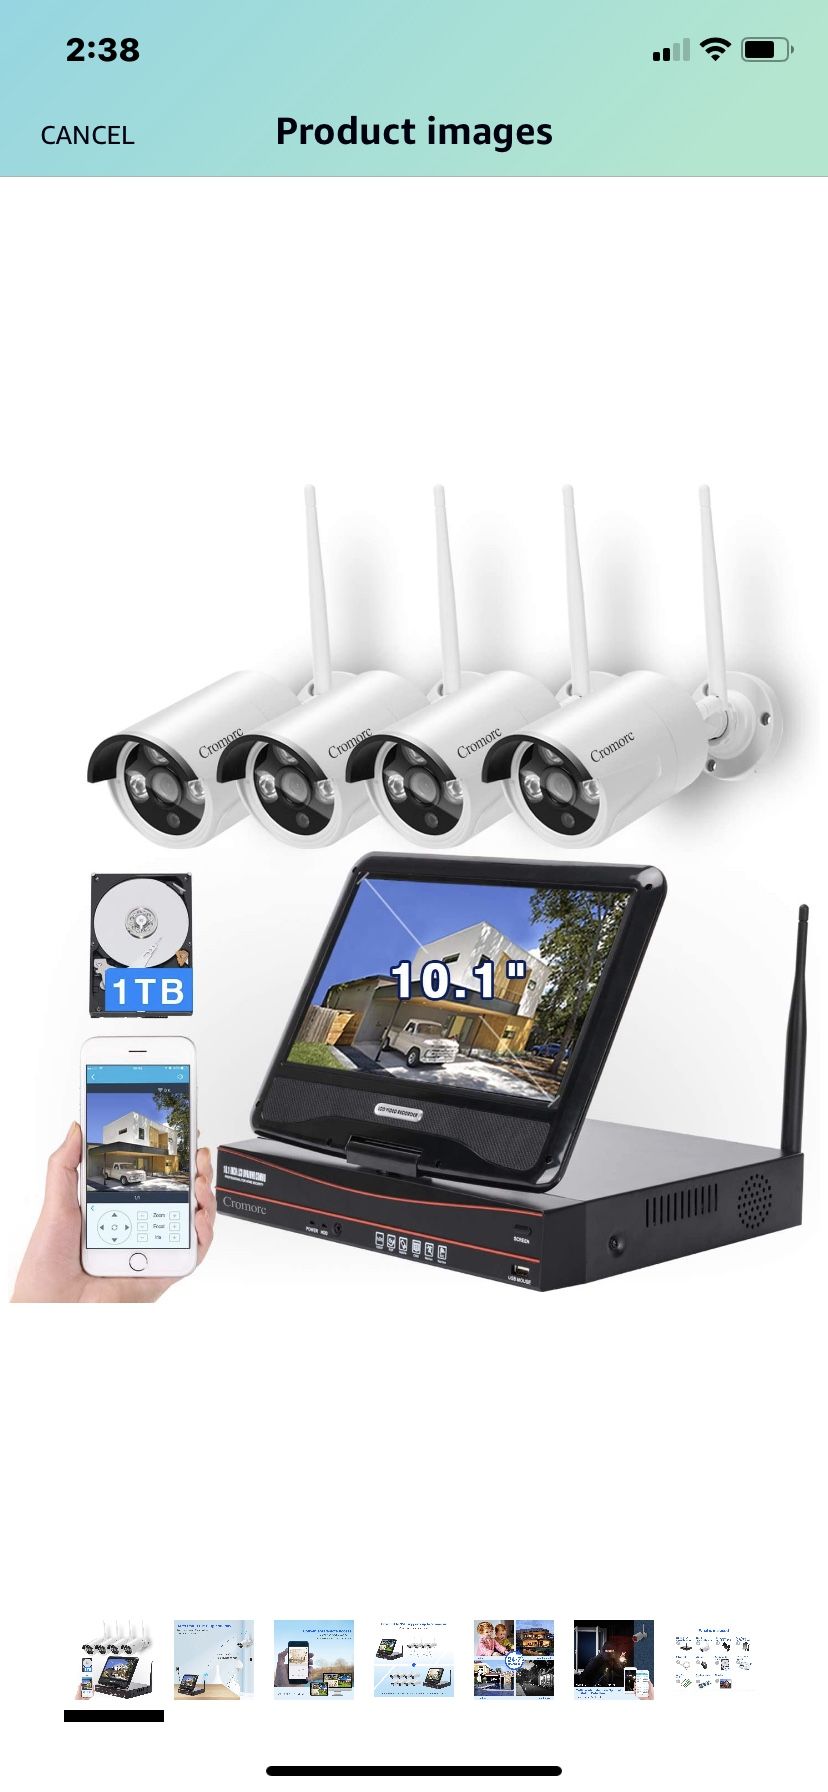 [8CH, Expandable] All in one with 10.1" Monitor Wireless Security Camera System, Cromorc Home Business CCTV Surveillance 8CH 1080P NVR, 4pcs 1080P In